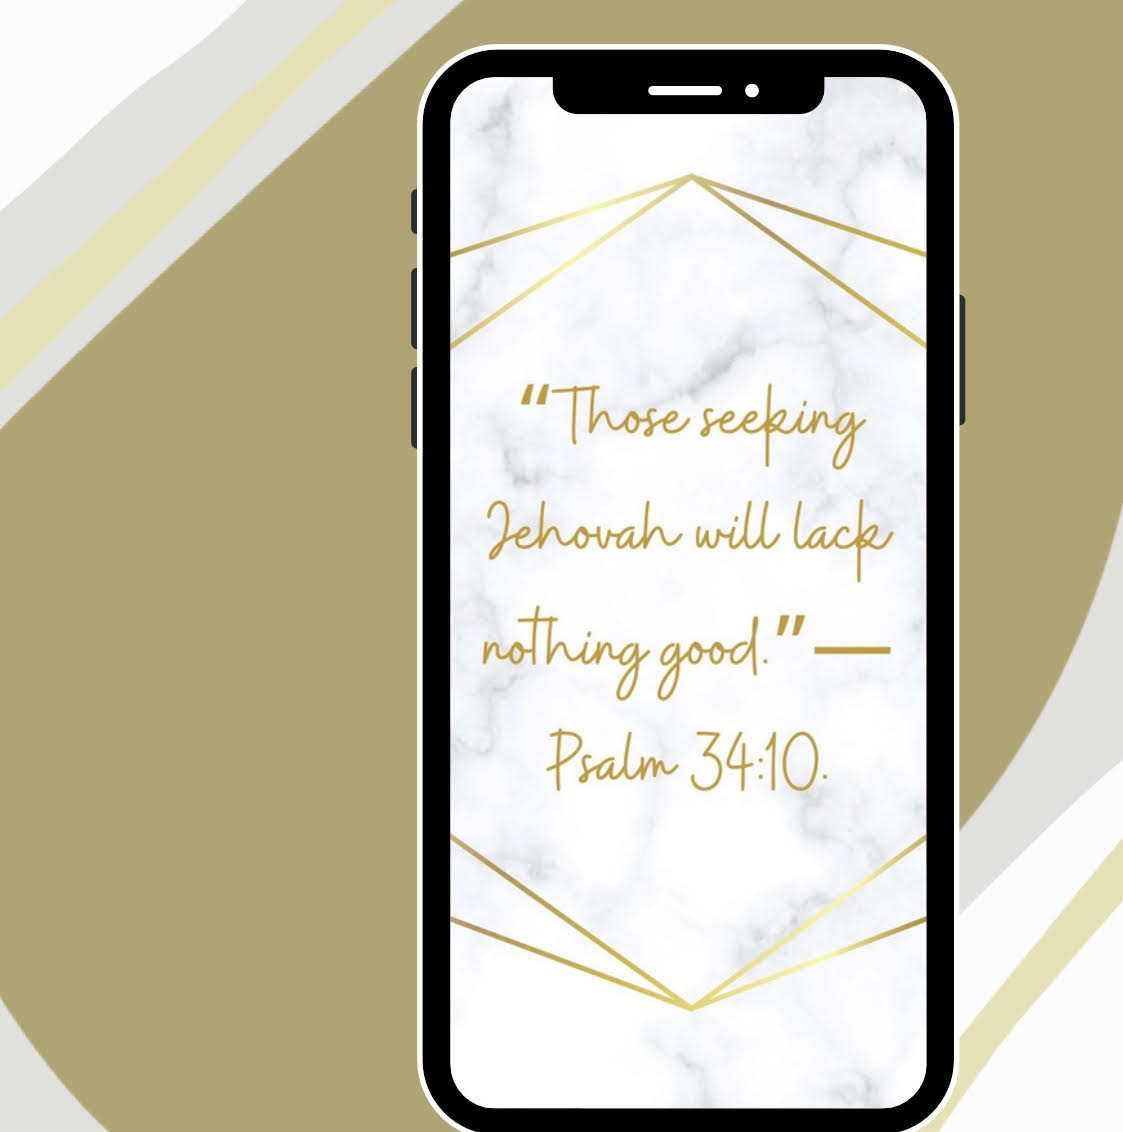 FREE Cell Phone Screensaver Pack - 8 photos - Psalm 34:10, "Those Seeking Jehovah will lack nothing good."